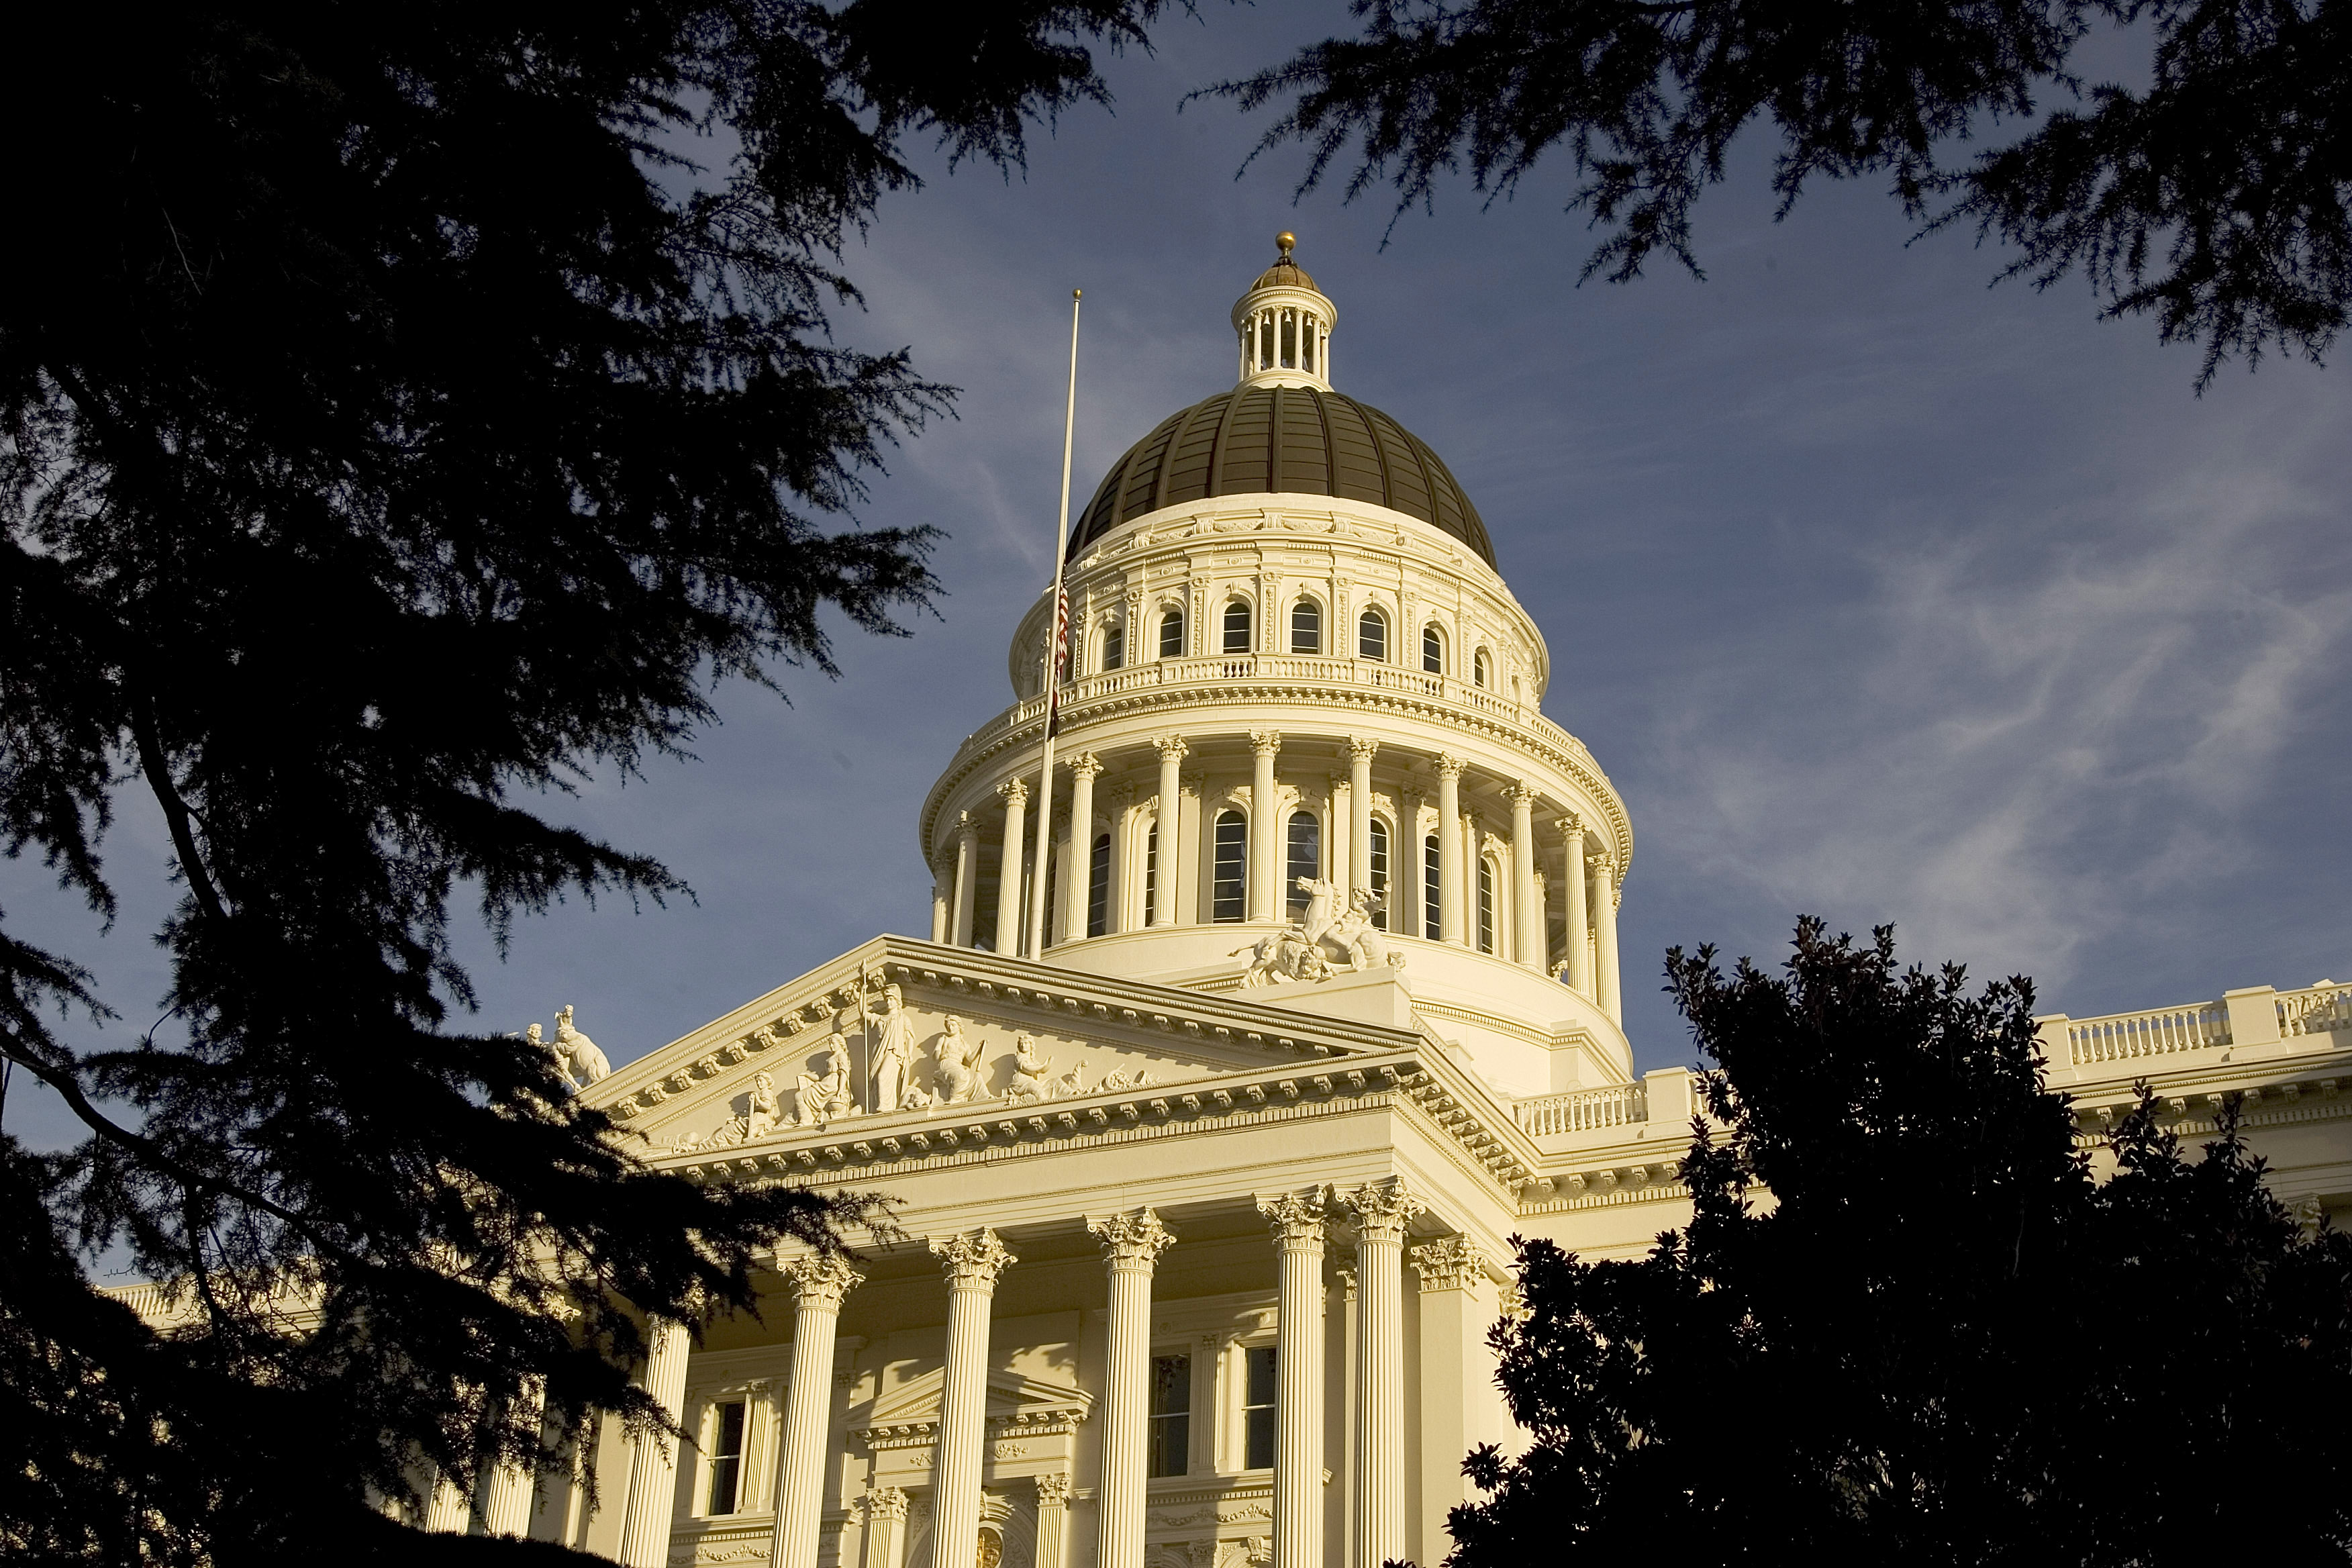 California wins Congress to deliver stimulus checks, 5.7 million will receive an extra $ 600